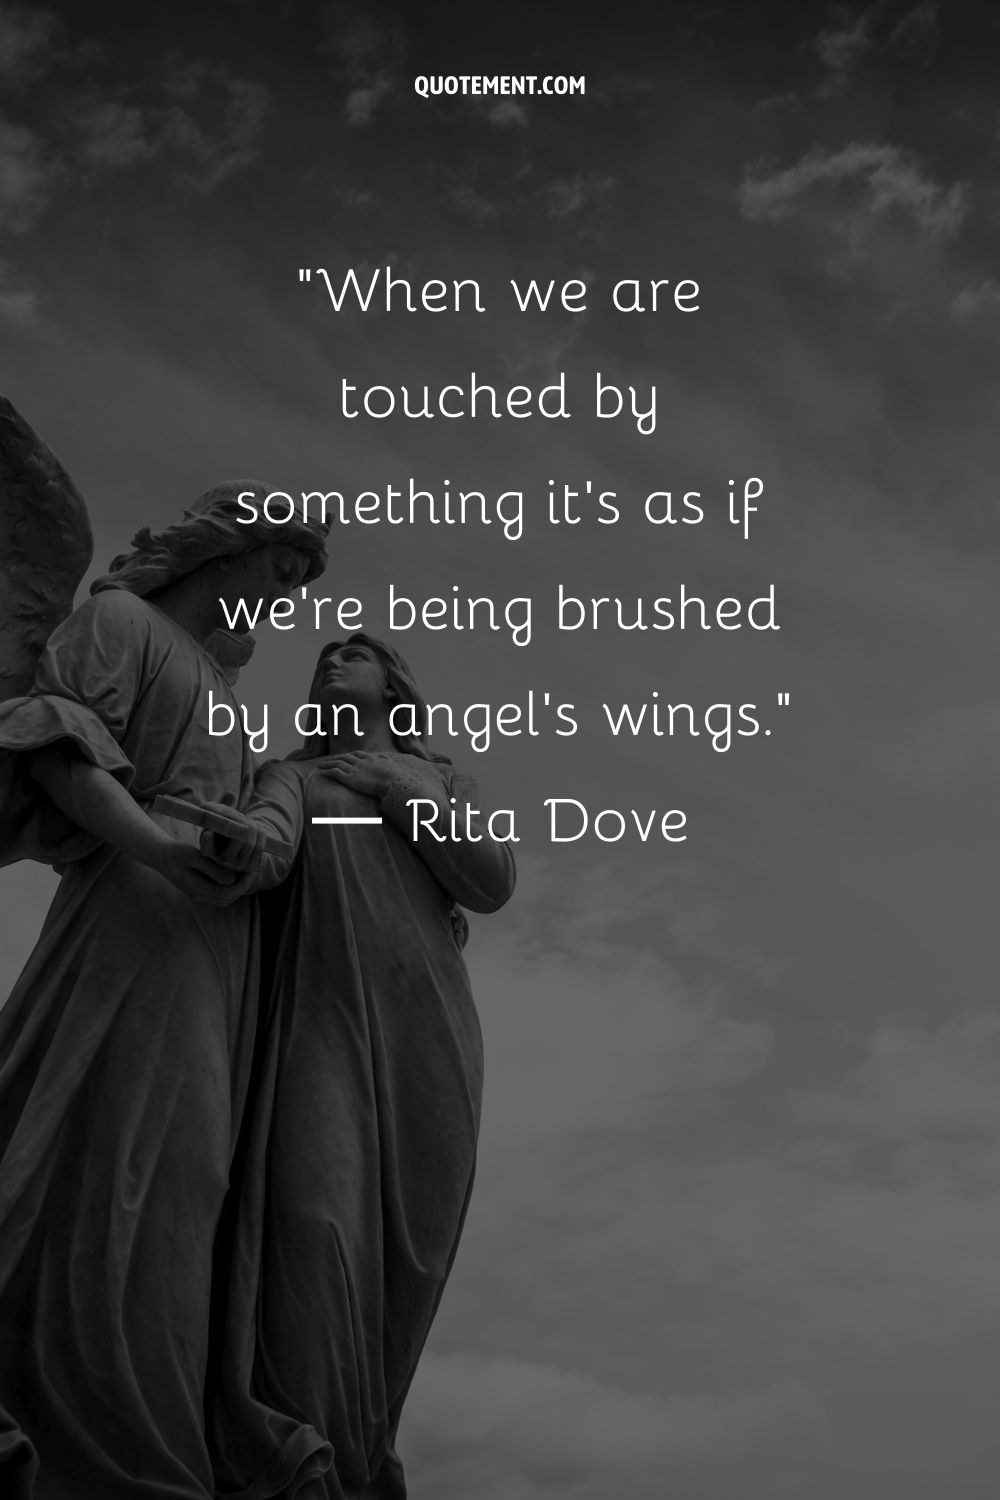 When we are touched by something it's as if we're being brushed by an angel's wing